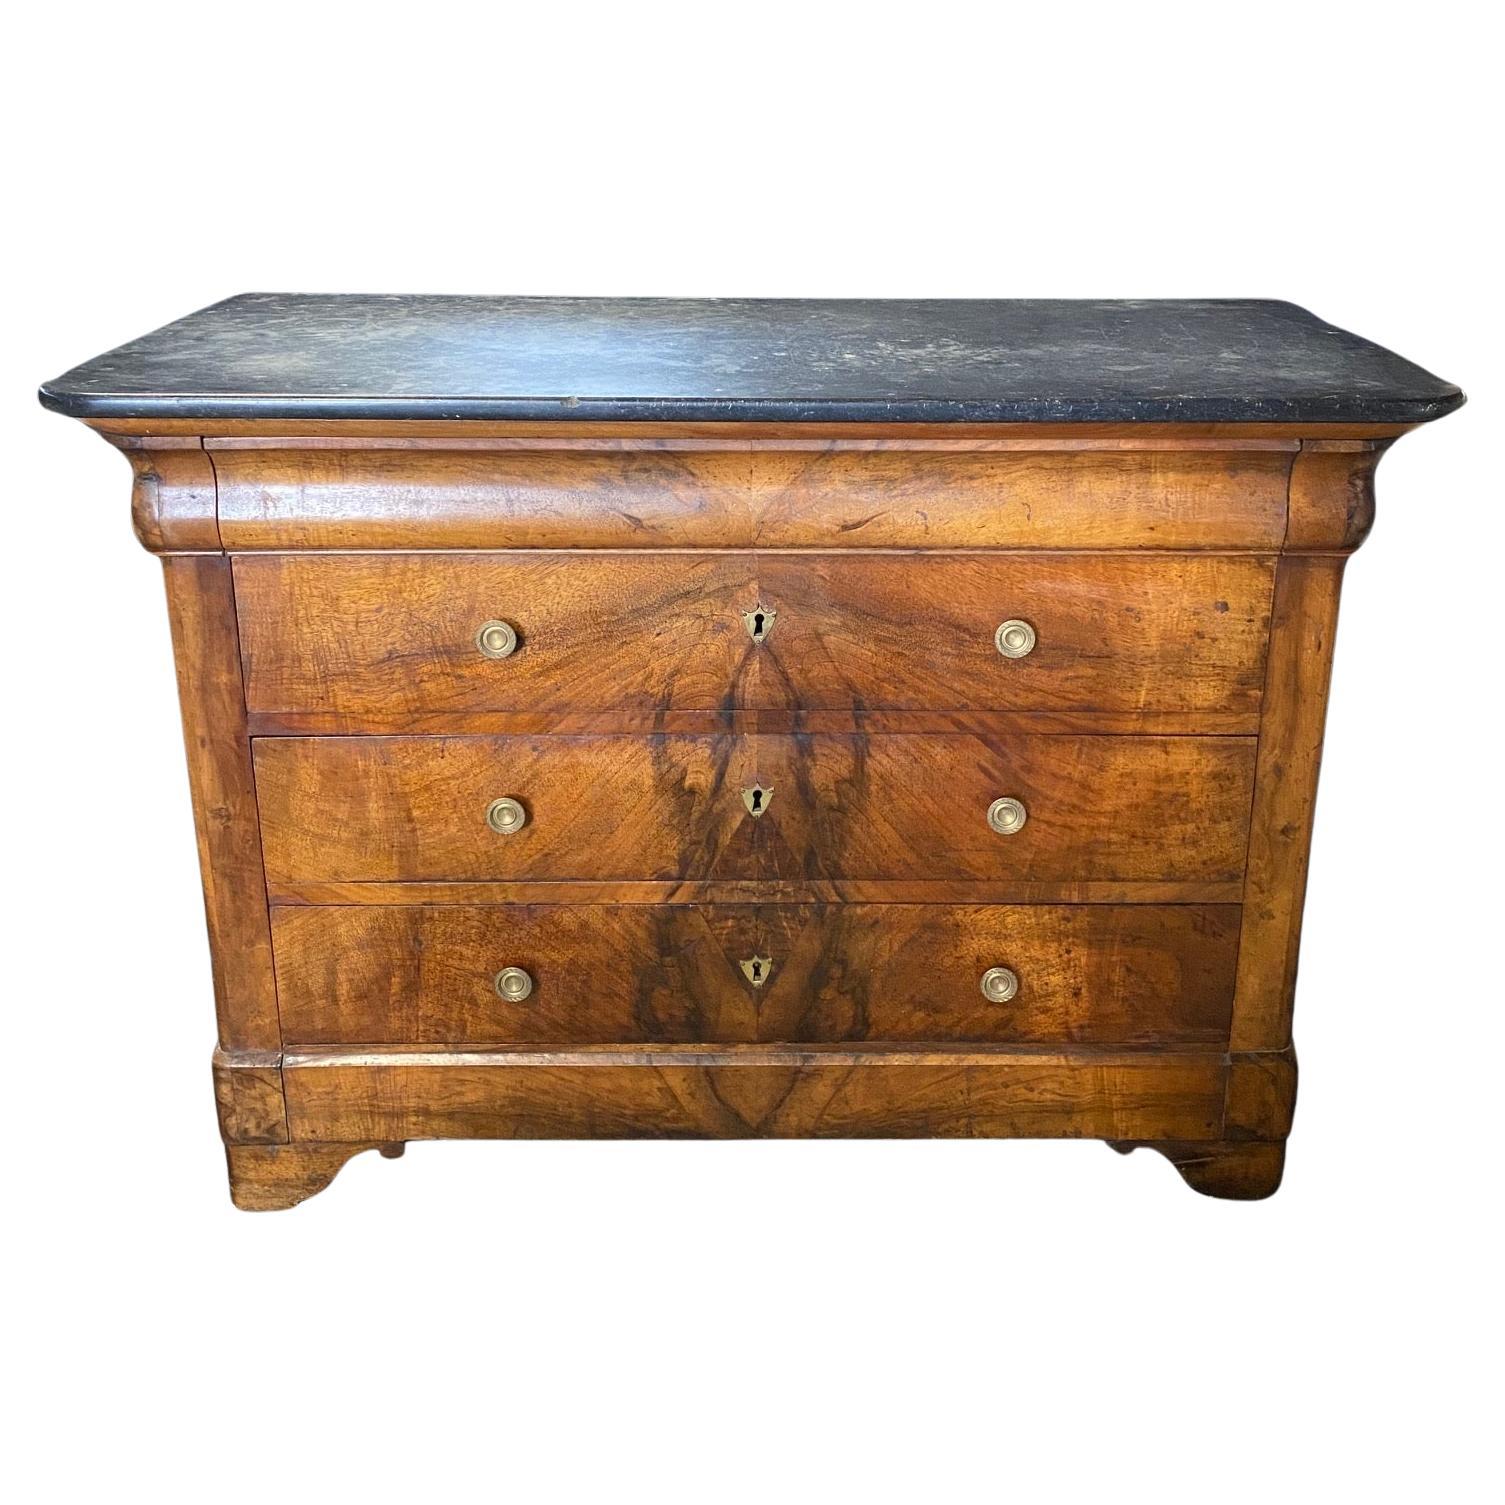  French Neoclassical 19th Century Walnut Marble Top Commode Chest of Drawers